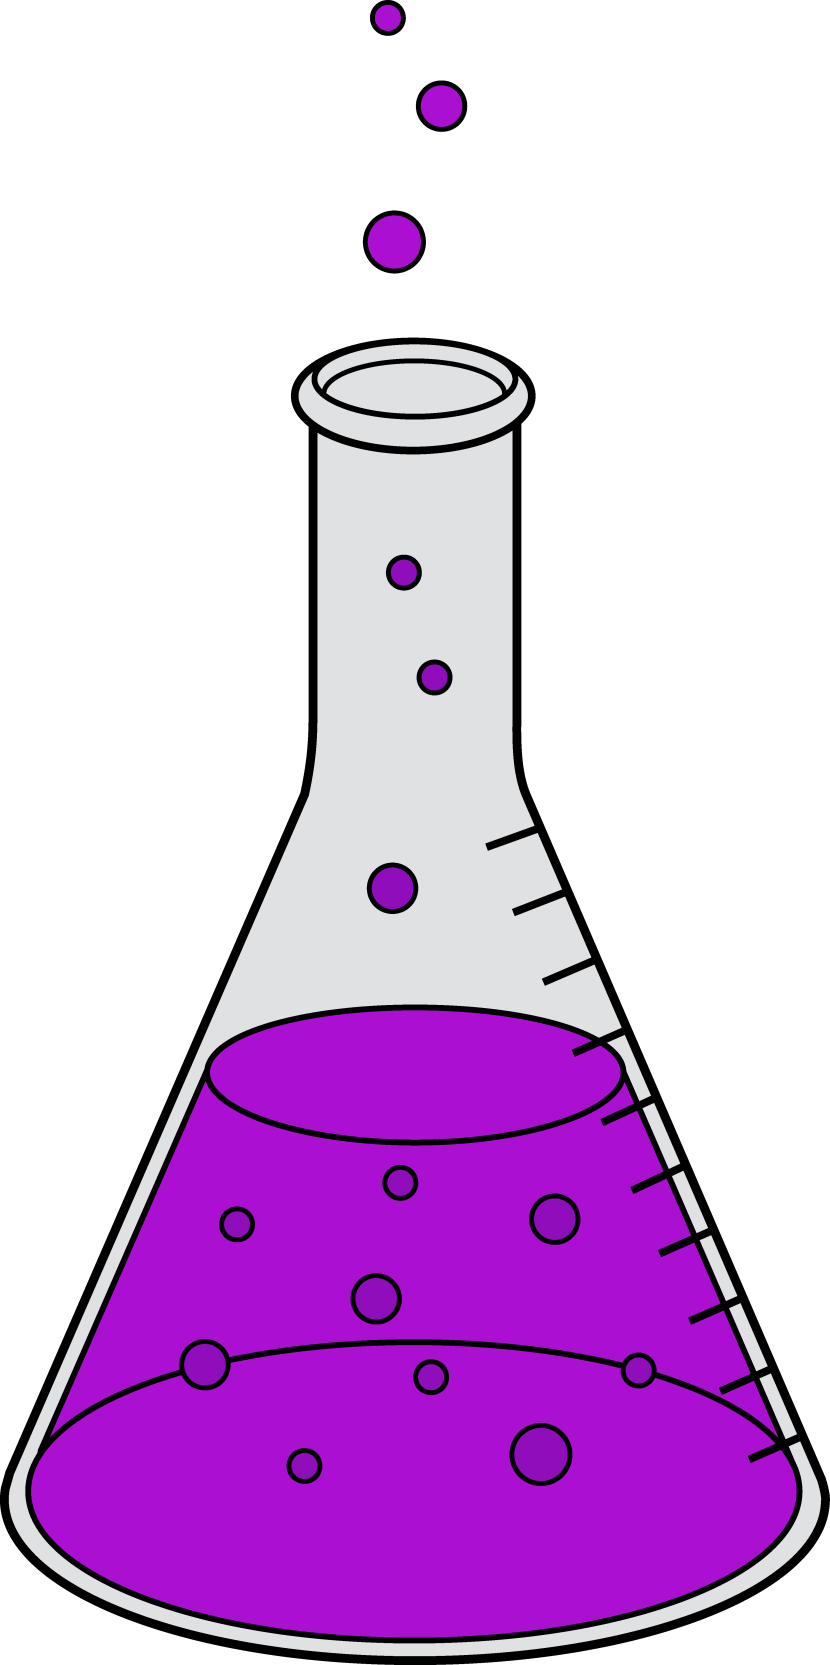 Free Science Beaker Cliparts, Download Free Clip Art, Free